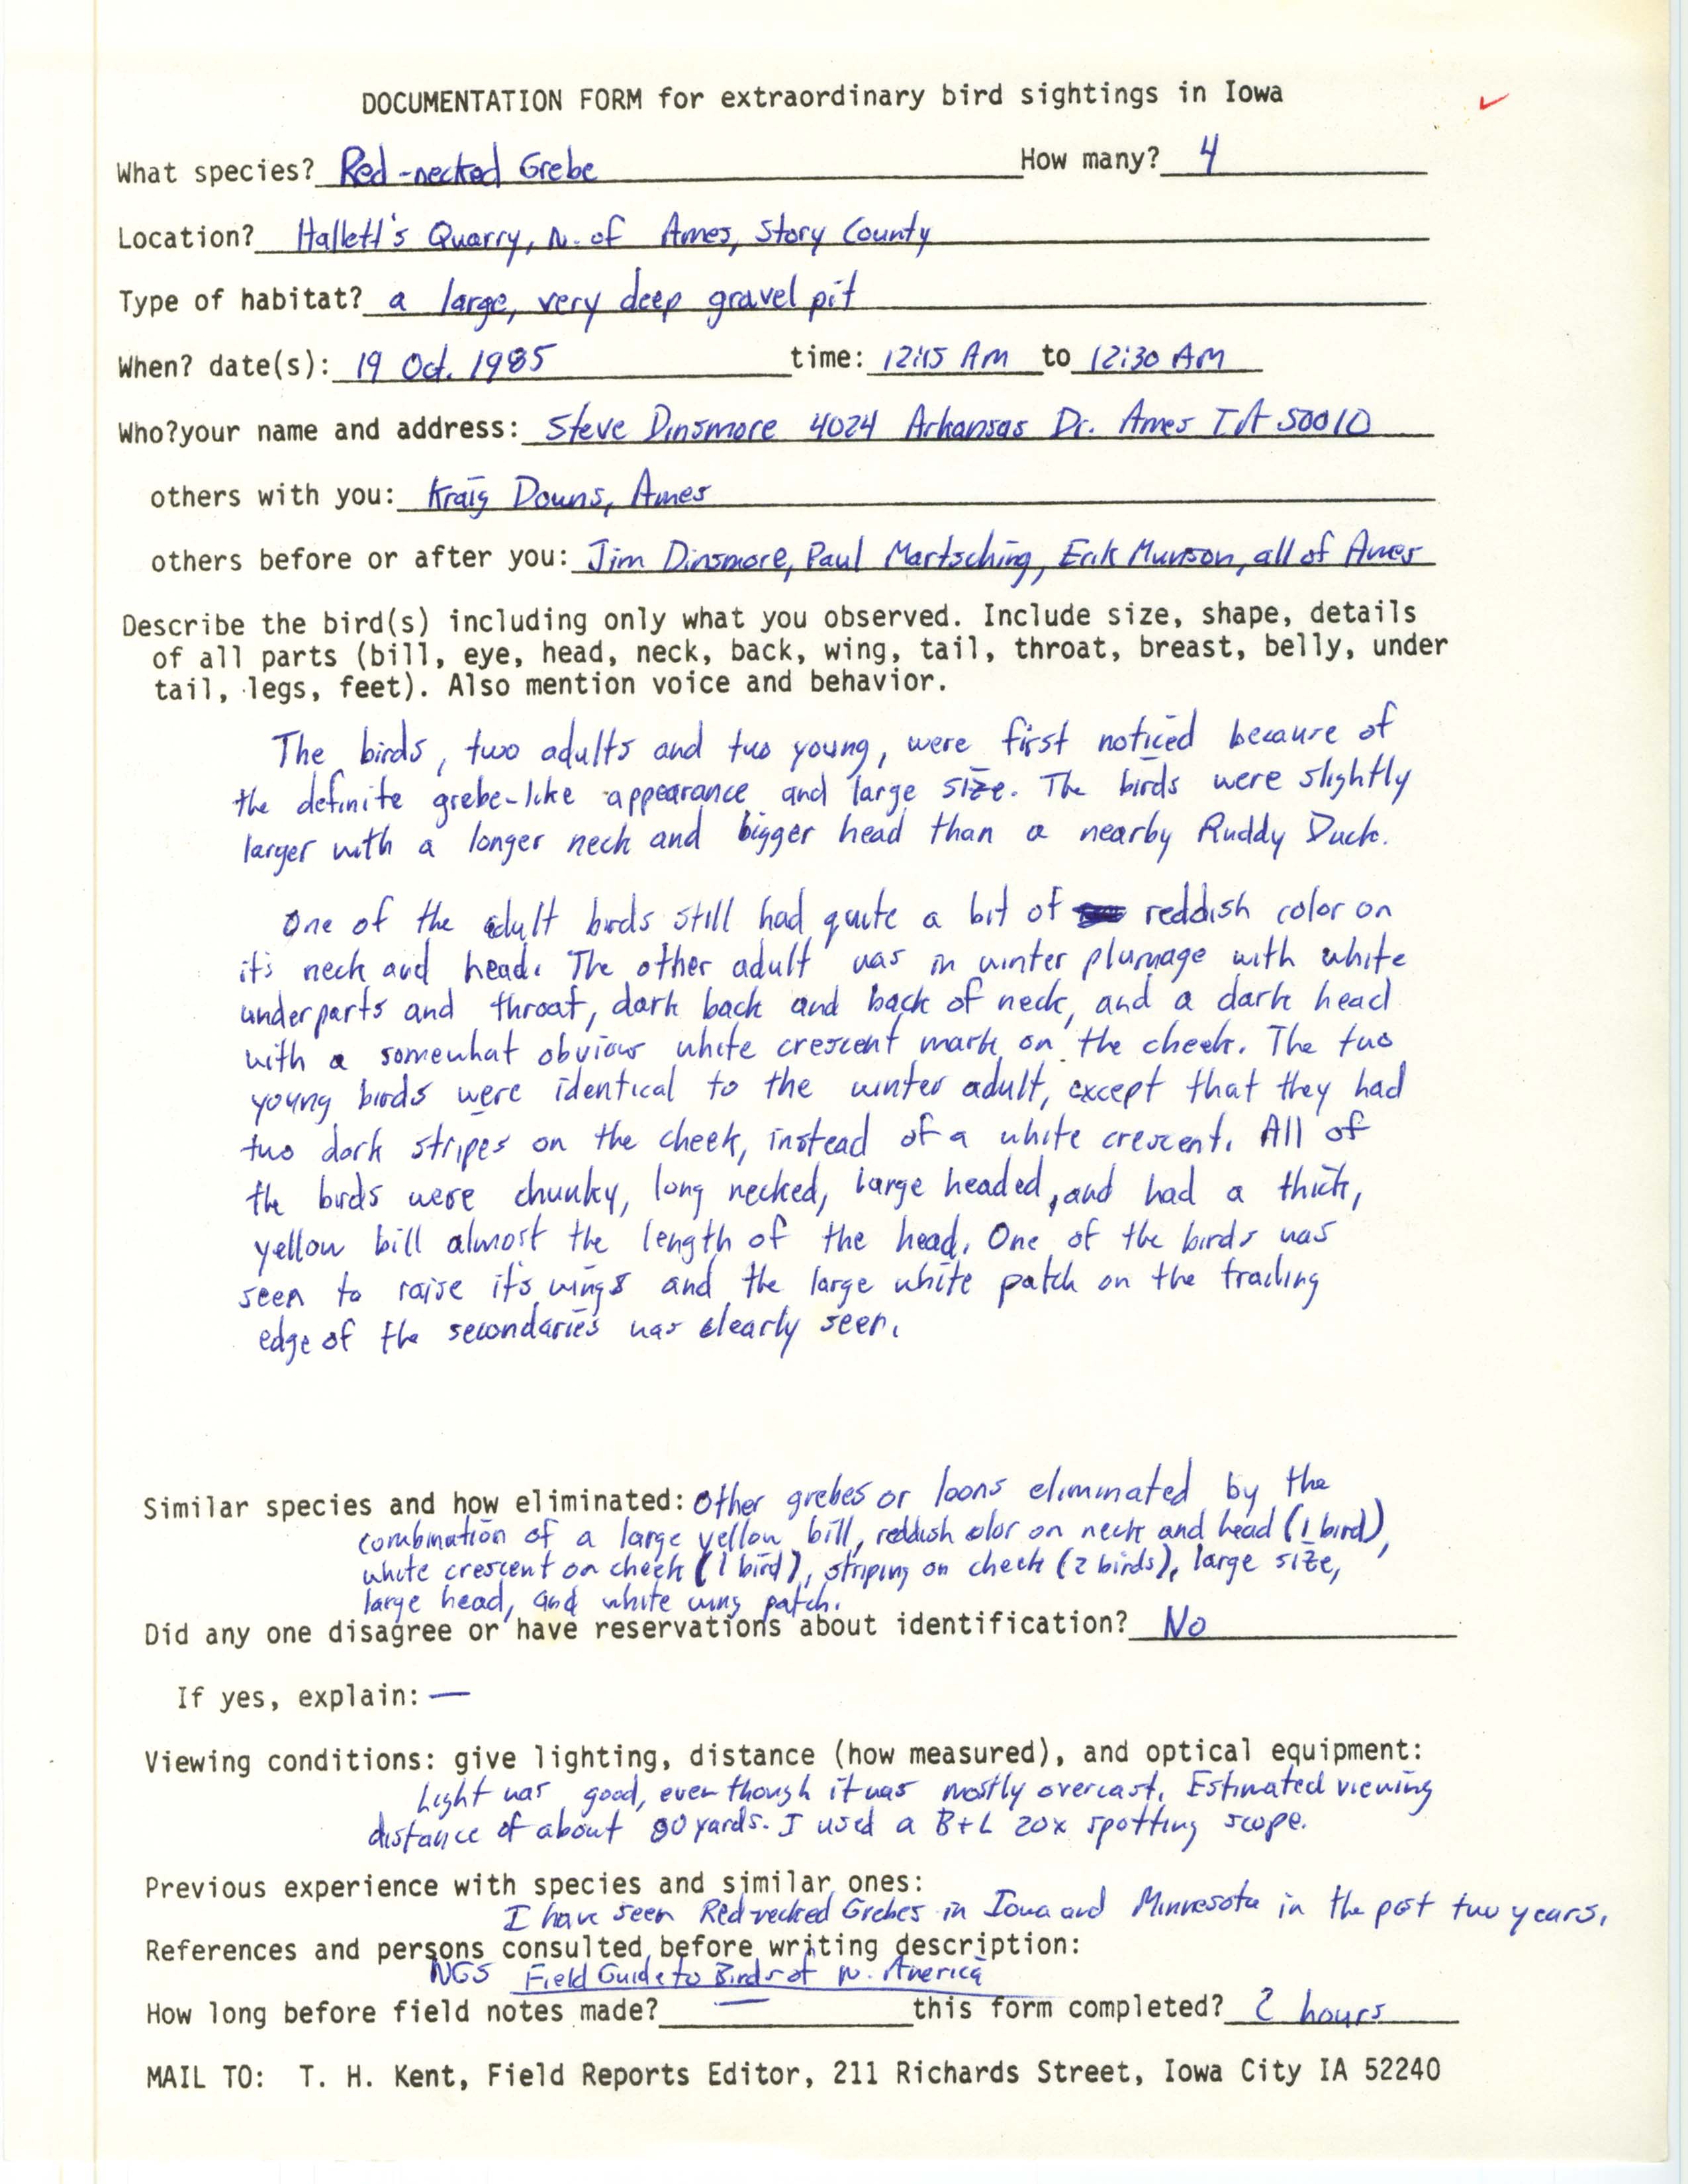 Rare bird documentation form for a Red-throated Loon at Hallett's Quarry at Ames, 1985